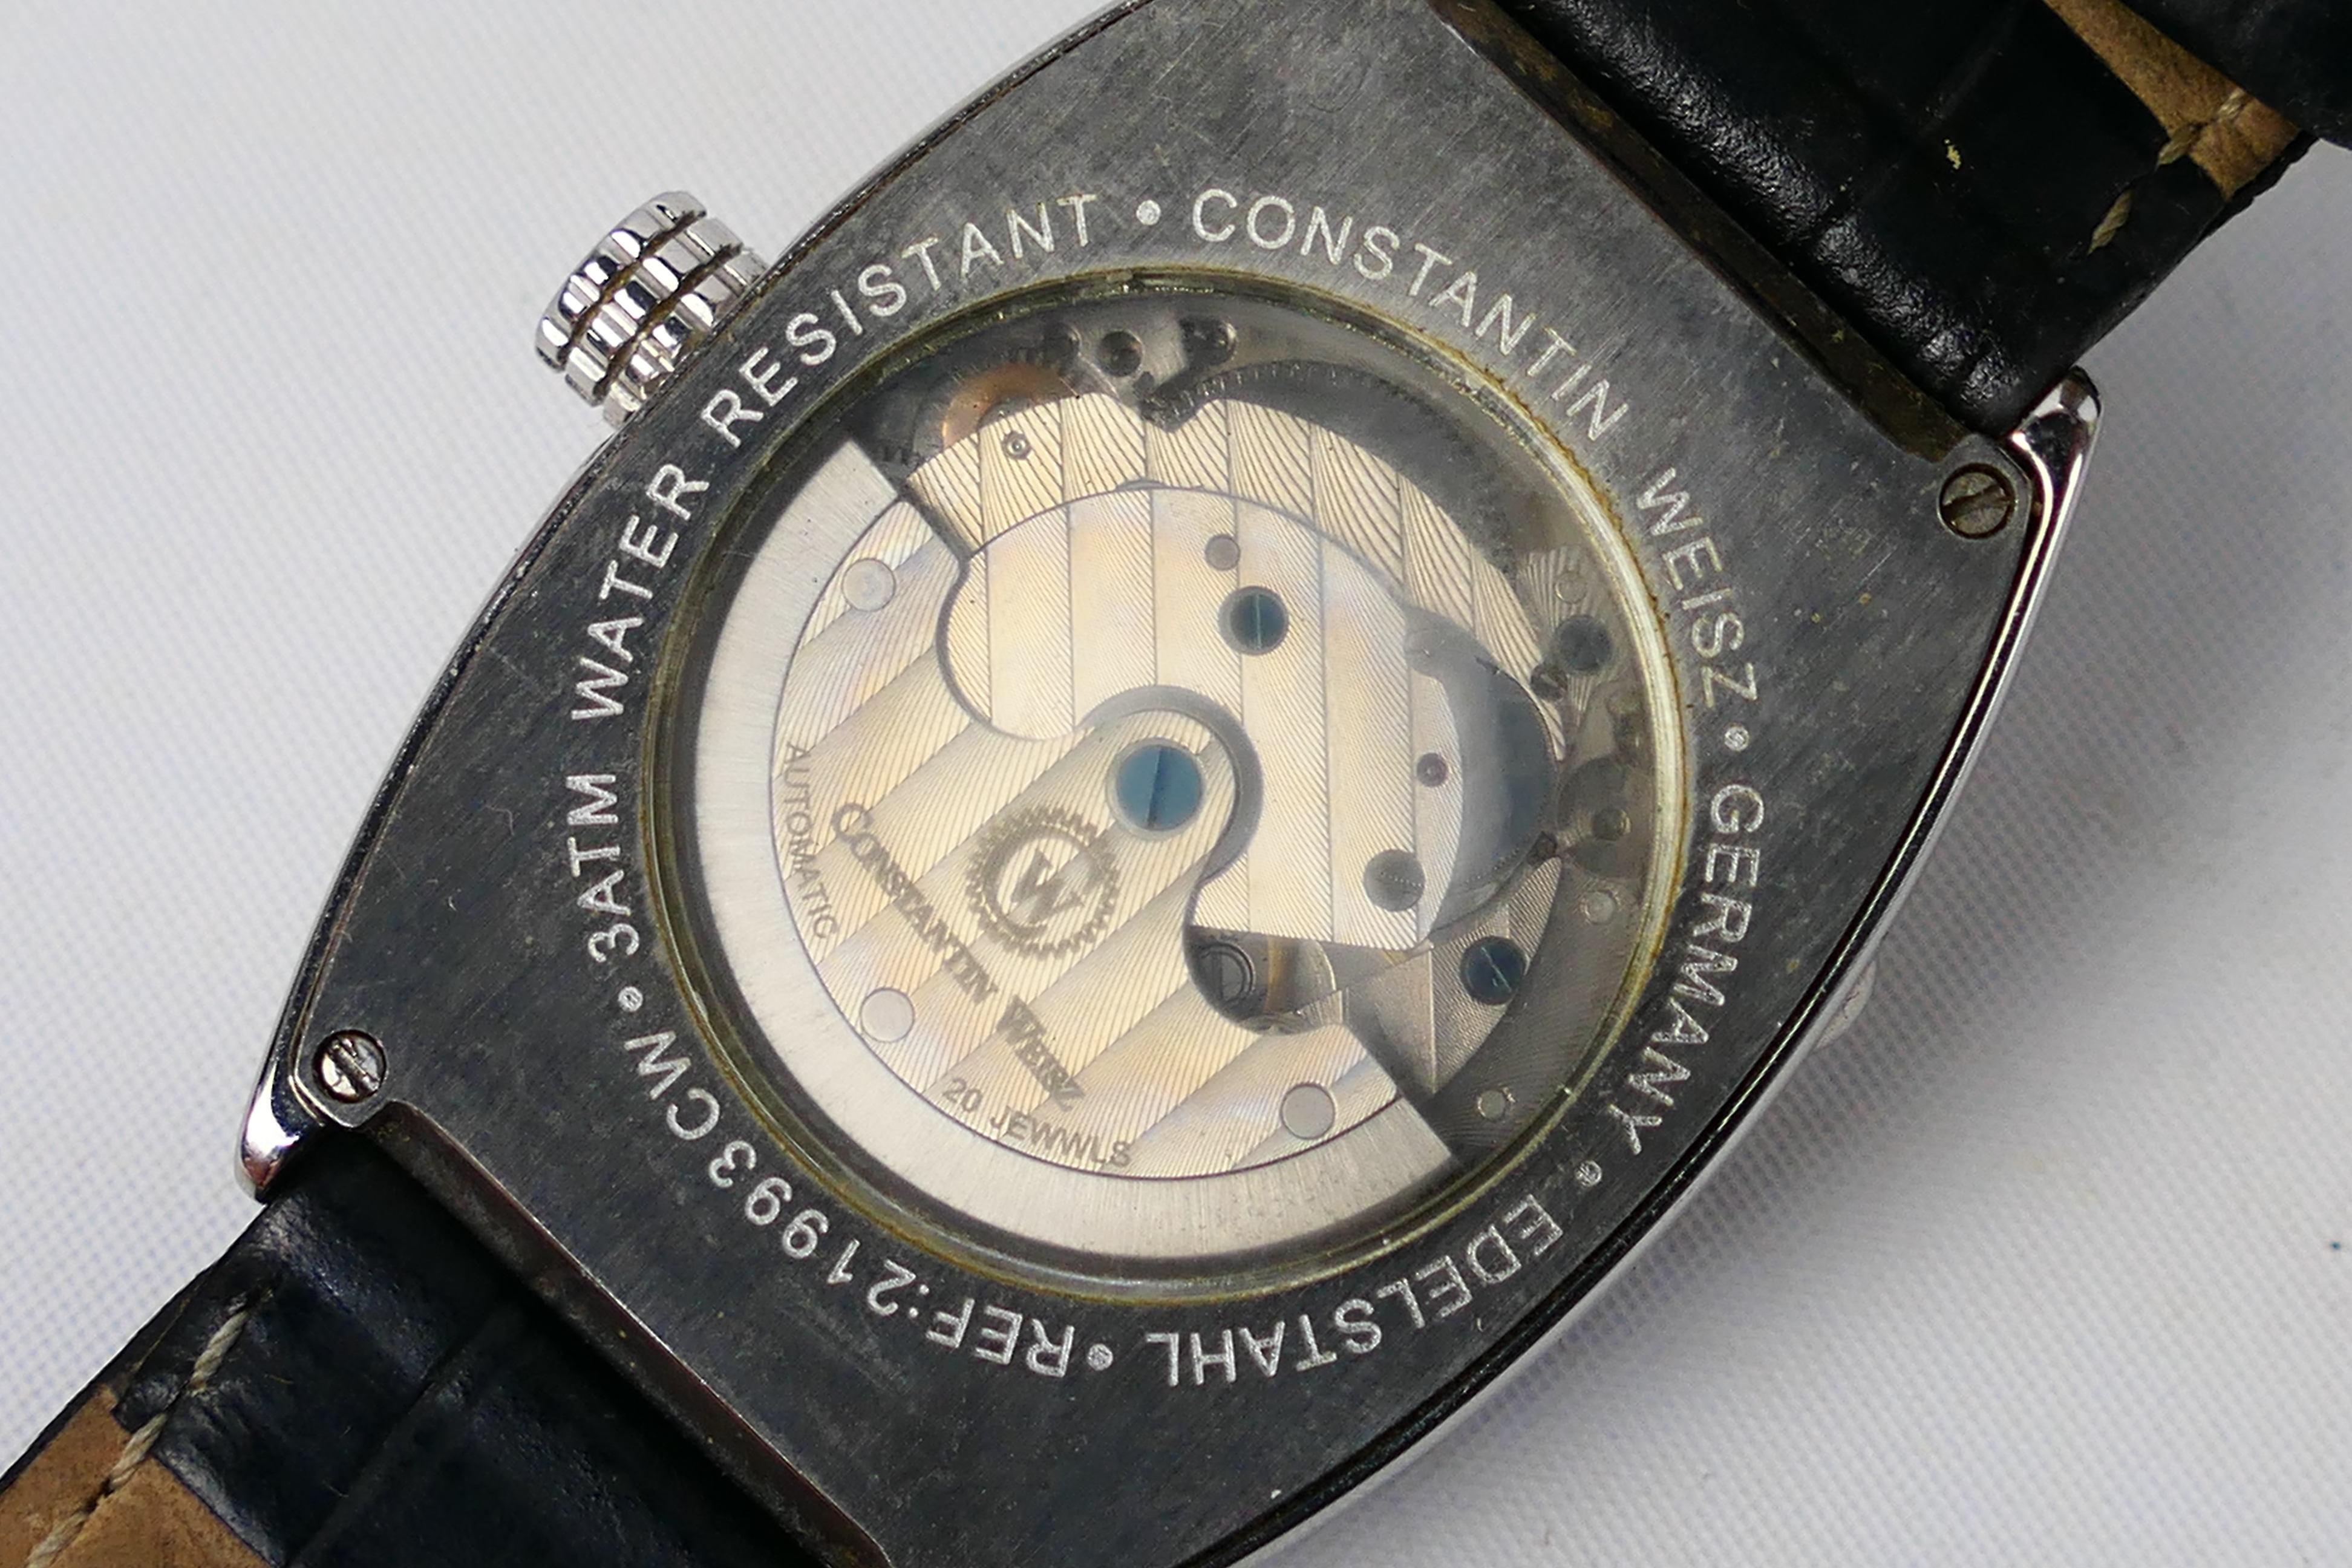 An Art Deco style gentleman's wrist watch by Constantin Weisz with subsidiary seconds dial - Image 6 of 10